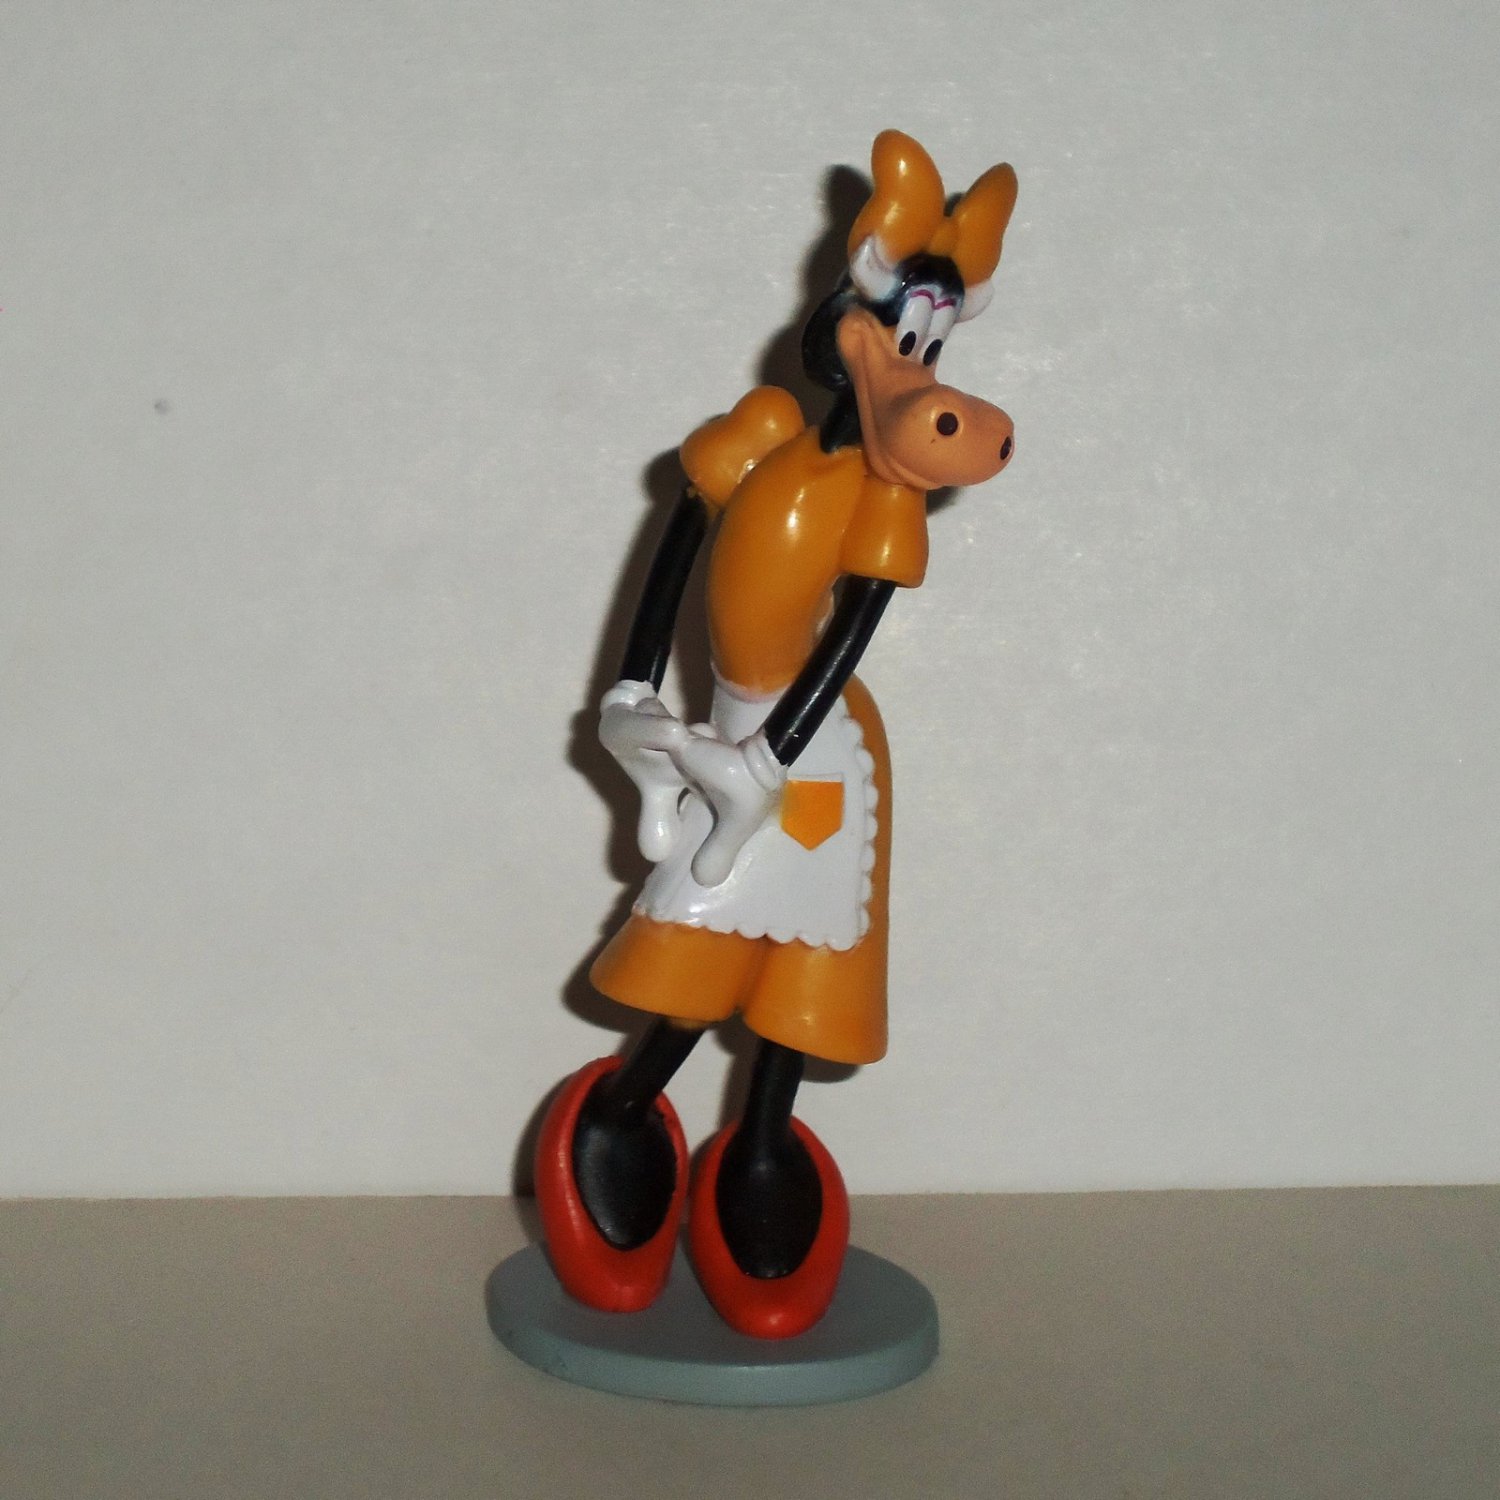 Disney Clarabelle Cow PVC Figure from Mickey Mouse Clubhouse Set Loose Used